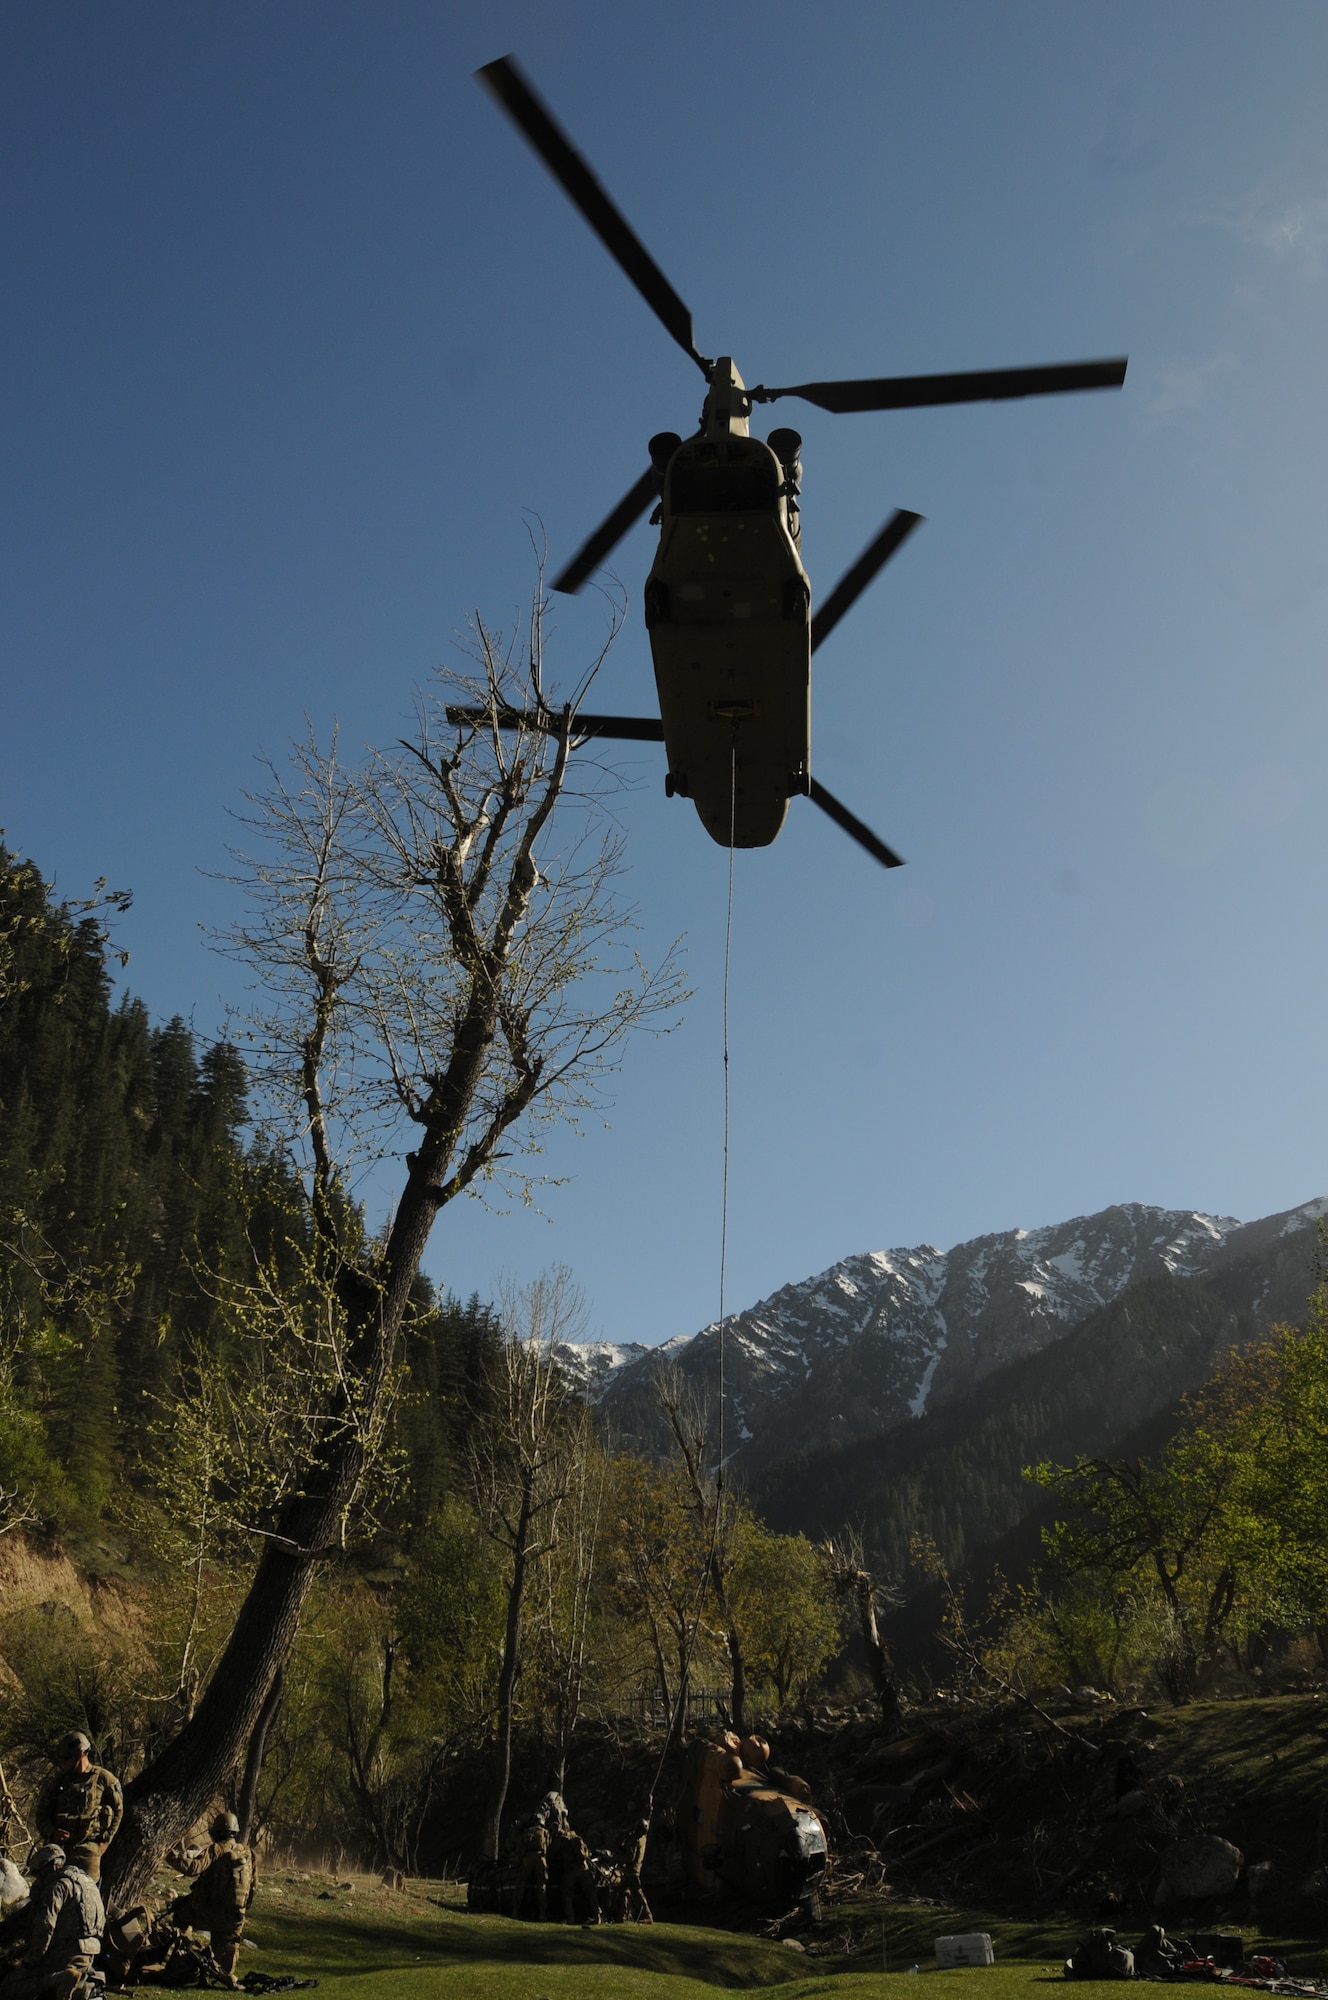 Nuristan,  Afghanistan. Army Pathfinders of Fox Company, 2nd Battalion, 10th Combat Aviation Brigade Fort Drum, NY watch as segments of a Afghan Air Force Mi-17 helicopter is sling loaded away by a CH-47 Chinook. The Pathfinders are tasked to provide security around the perimeter and disassemble the crashed aircraft so it can be sling loaded by a CH-47 Chinook and taken to an airbase. Photo by Tech Sgt. Brian E. Christiansen.